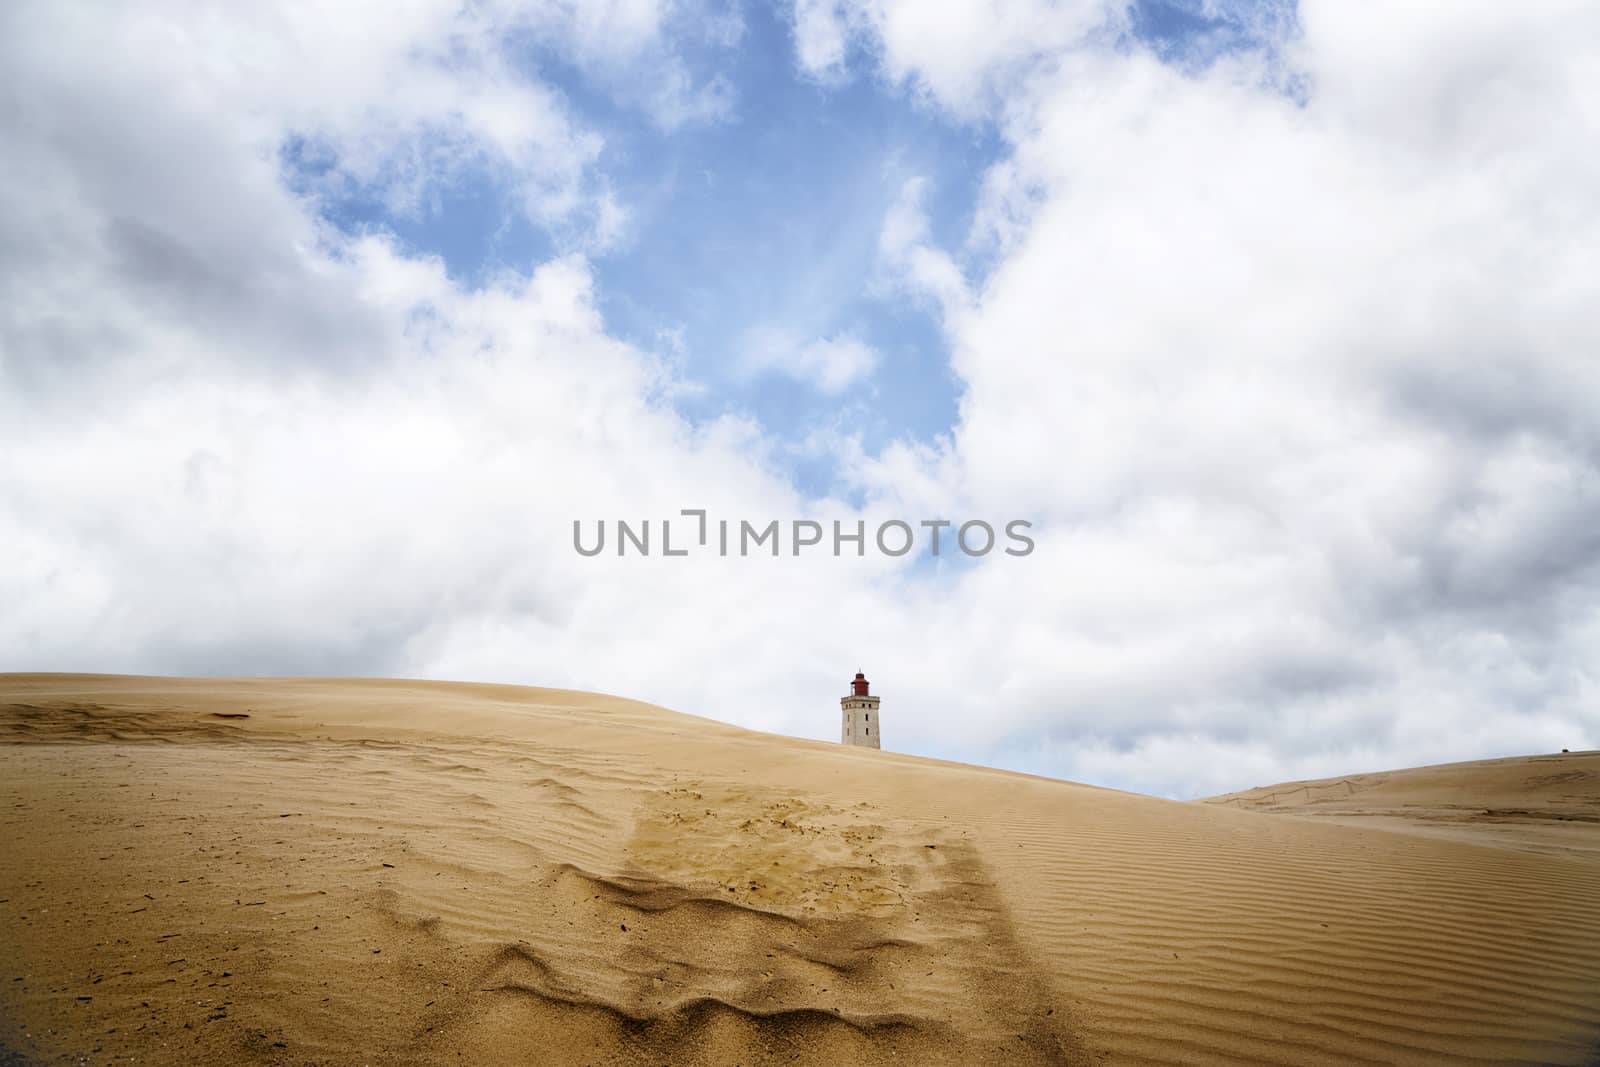 Lighthouse in the middle of a desert under a blue sky on a sandy dune